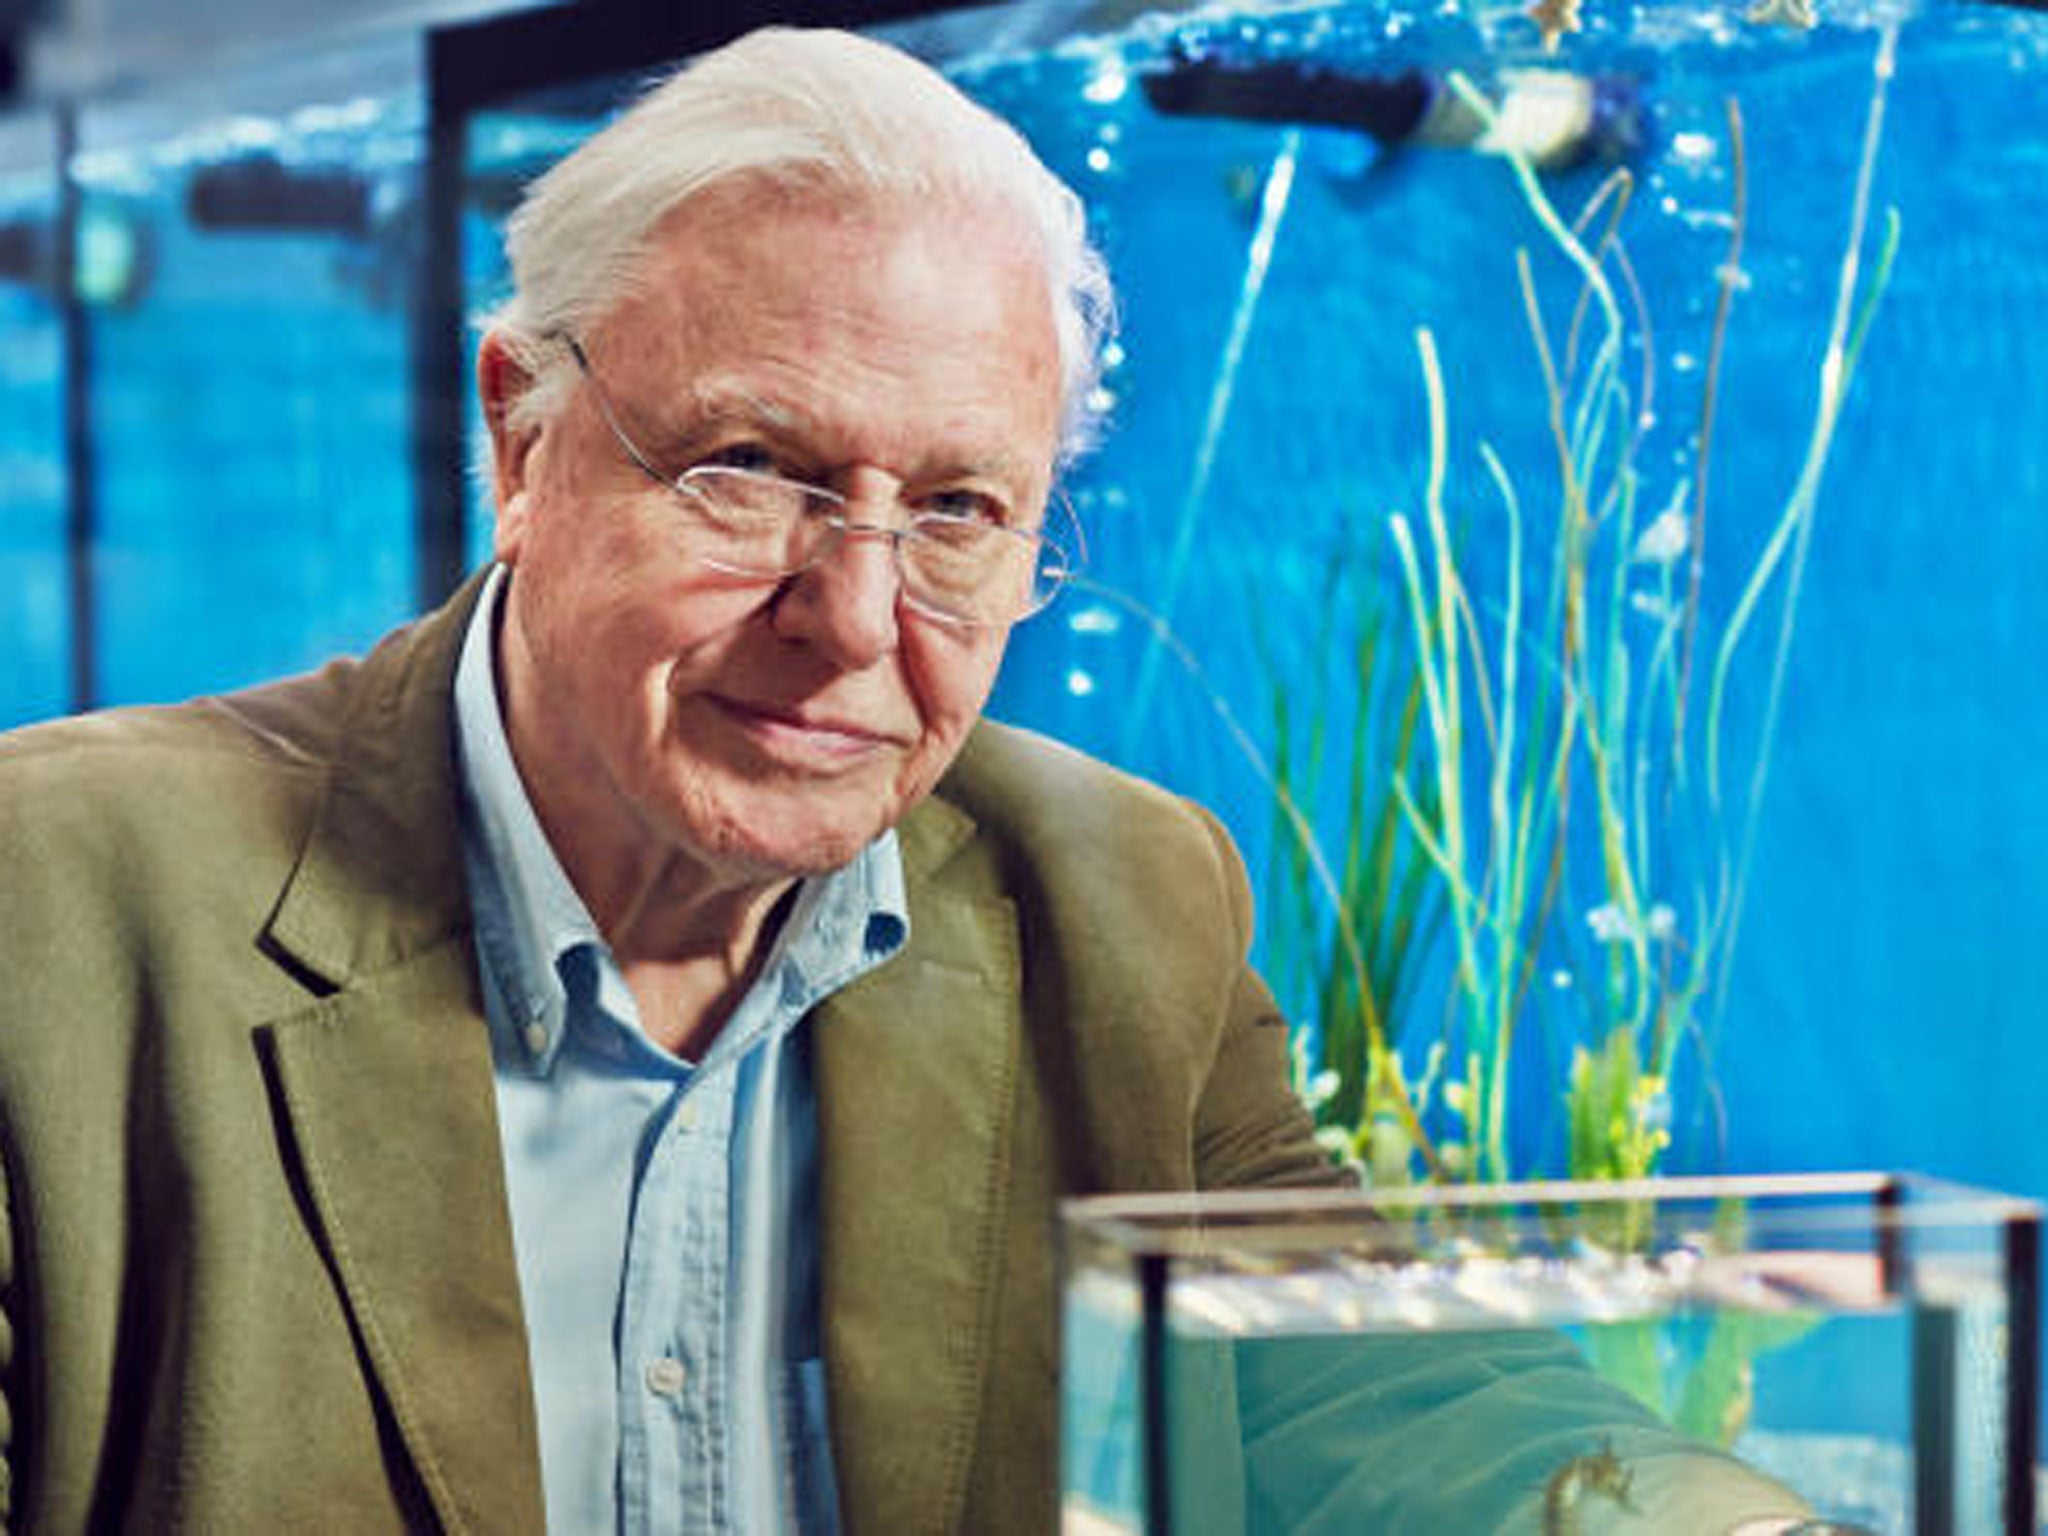 David Attenborough's Natural Curiosities: our interest is piqued and satisfied within one bite-sized half-hour episode